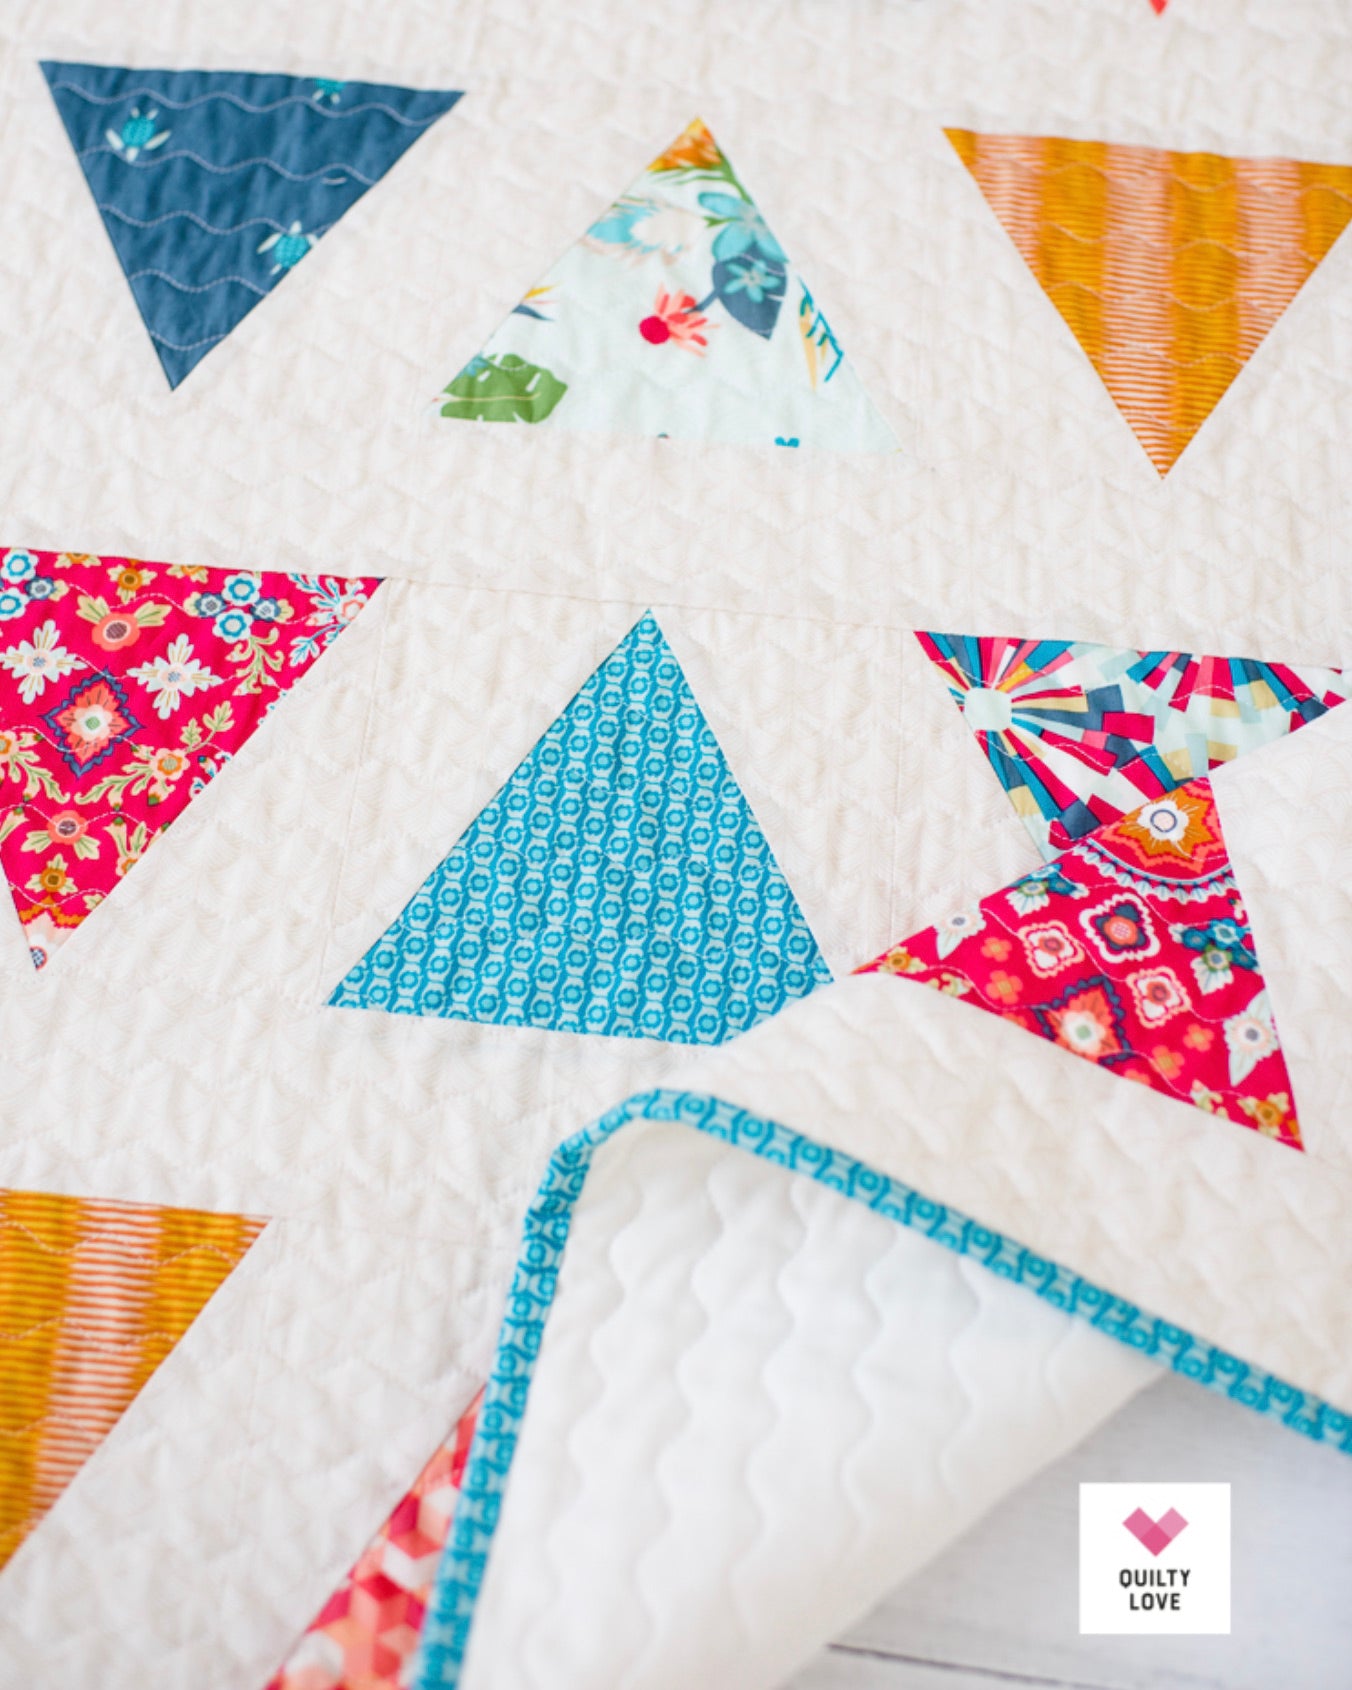 TRIANGLE POP Quilty Love Pattern by Emily Dennis #109